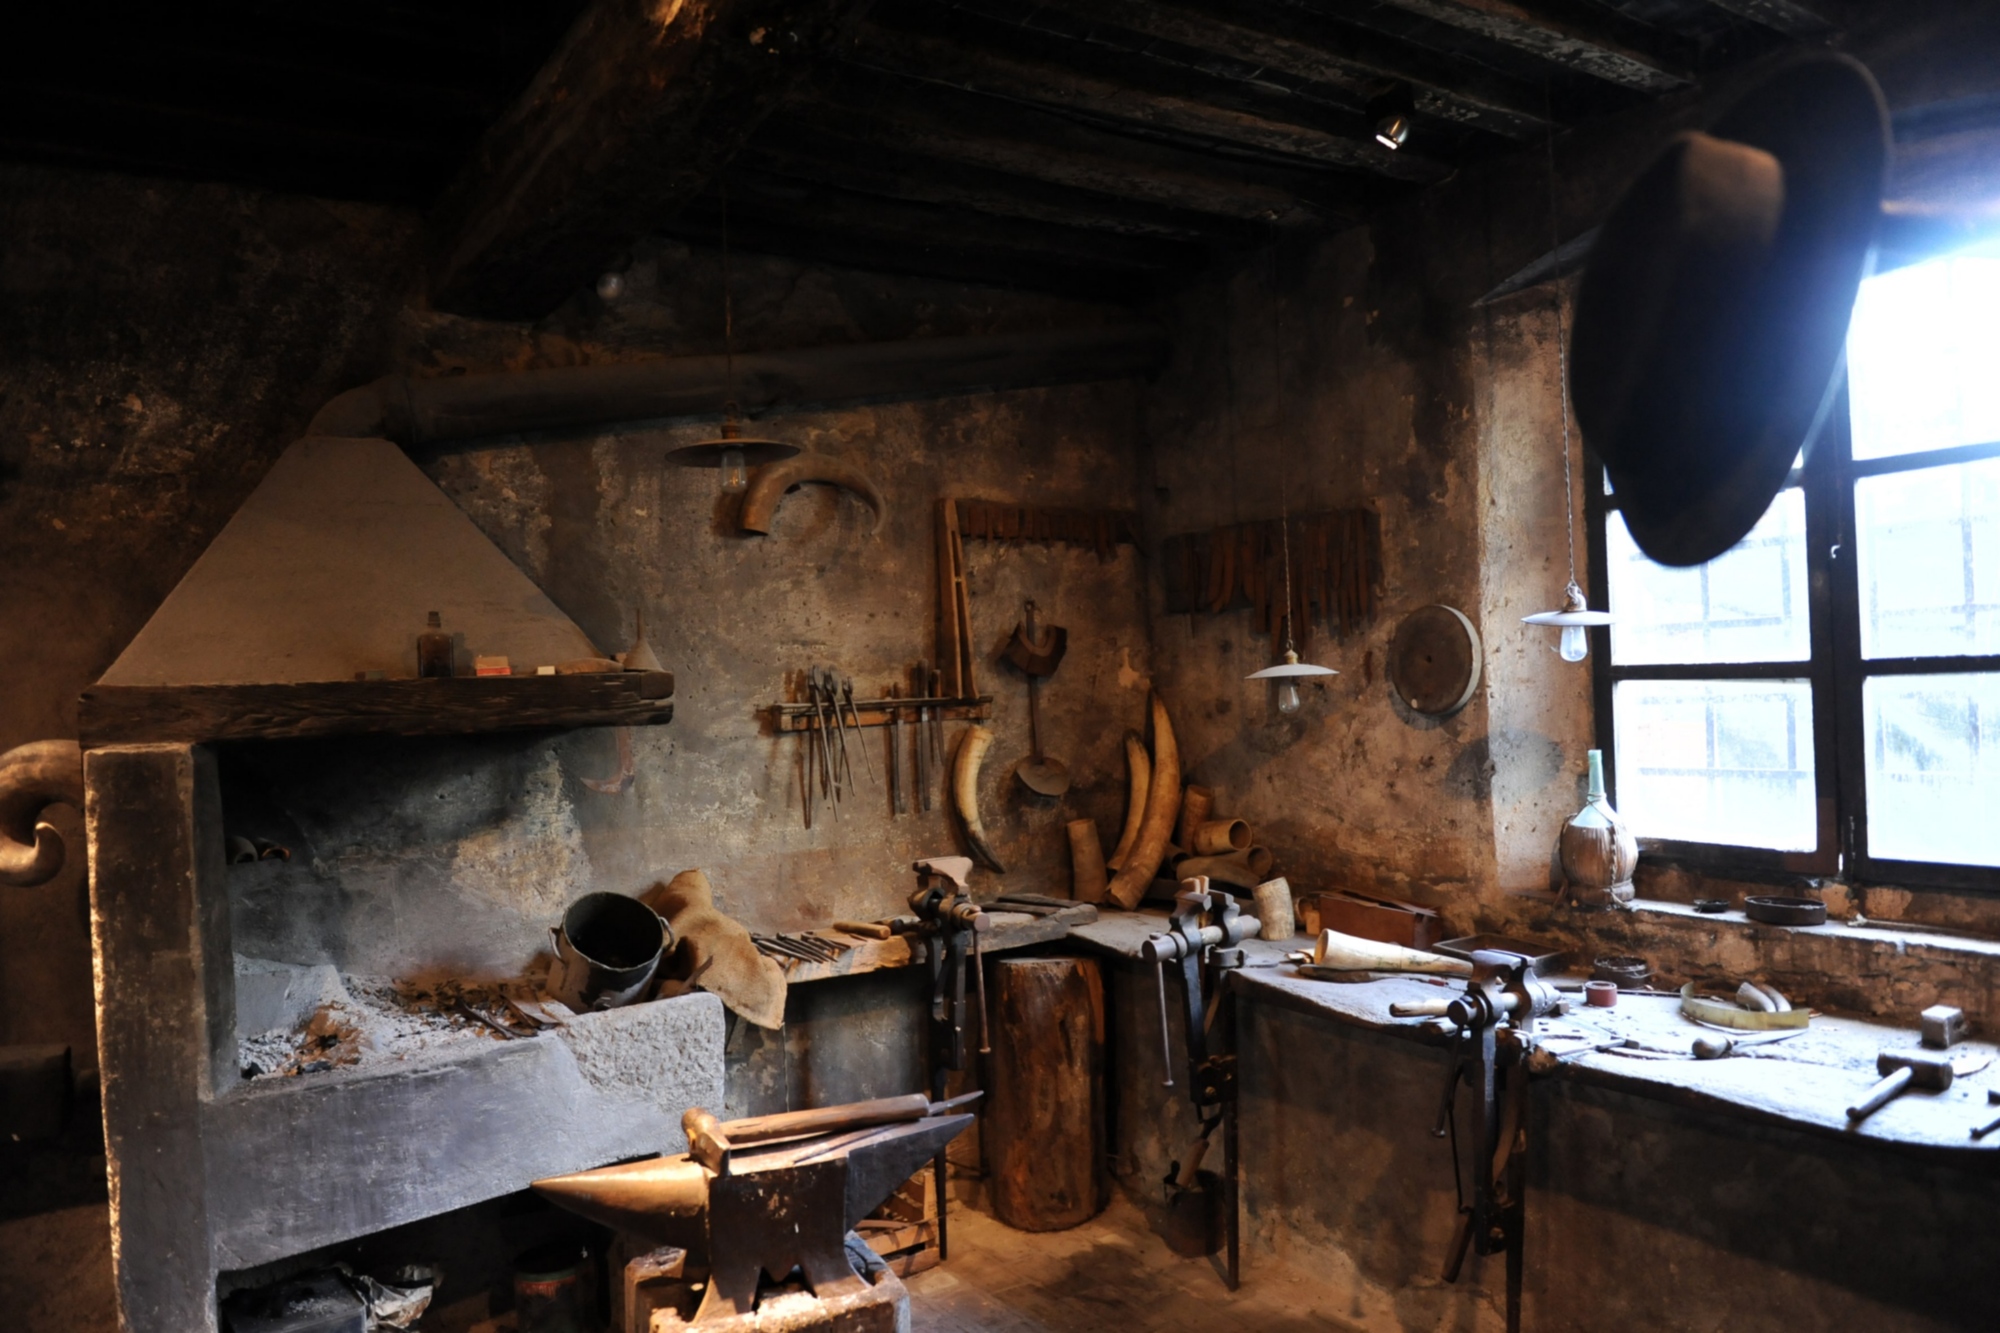 Knife-maker’s workshop, at the Museo dei Ferri Taglienti (Museum of the Sharp Irons)